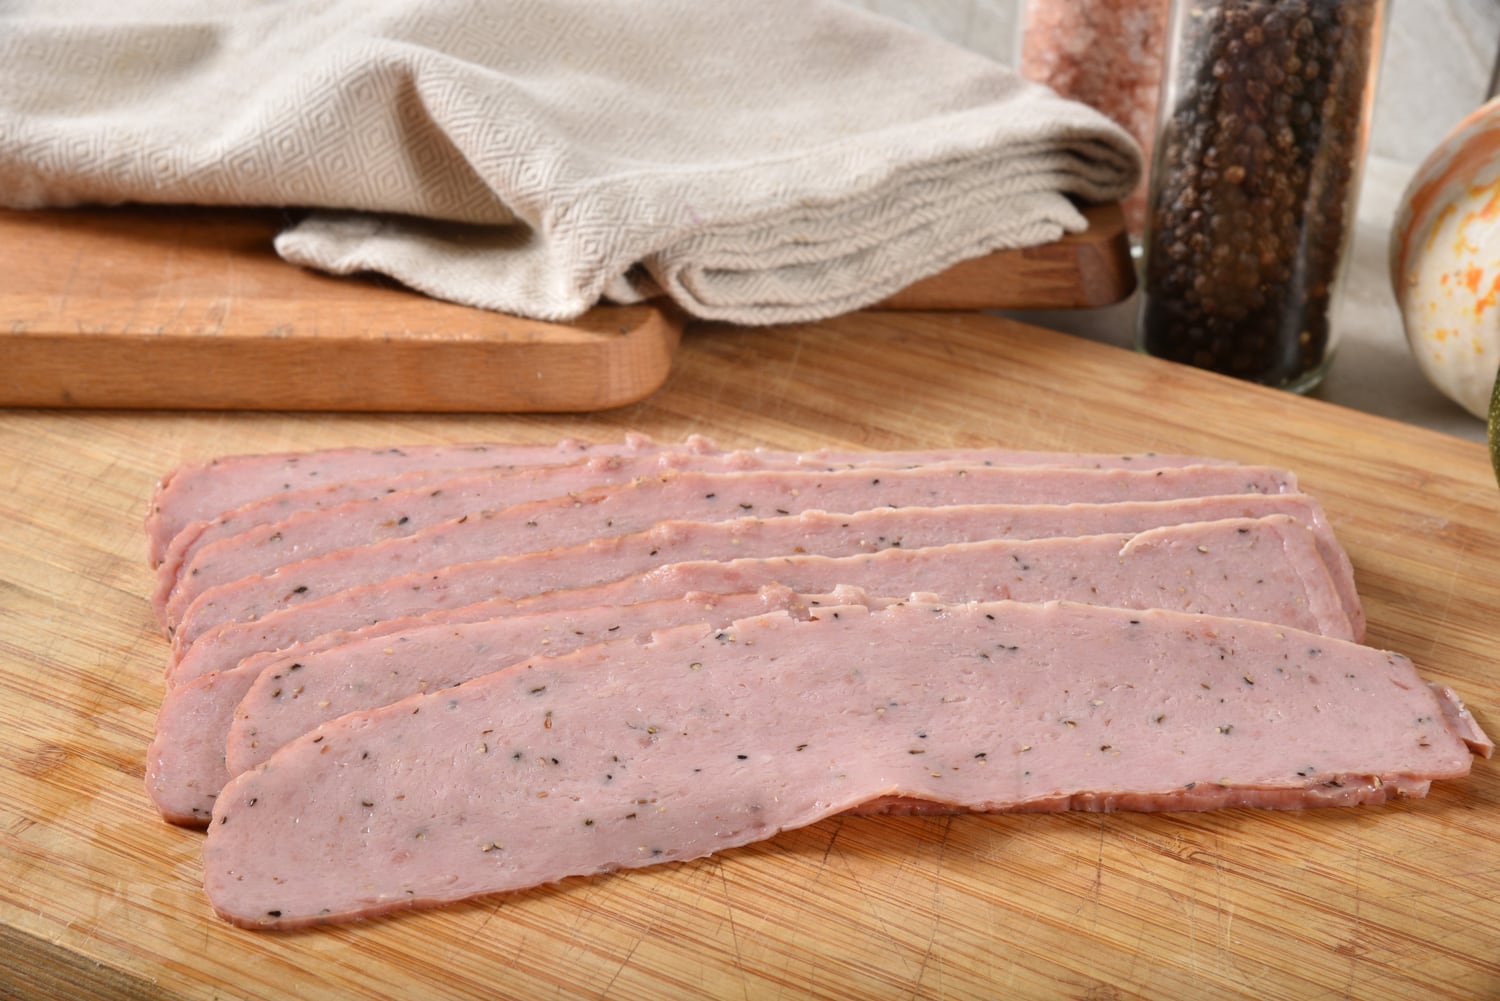 Natural, healthy turkey bacon slices on a cutting board